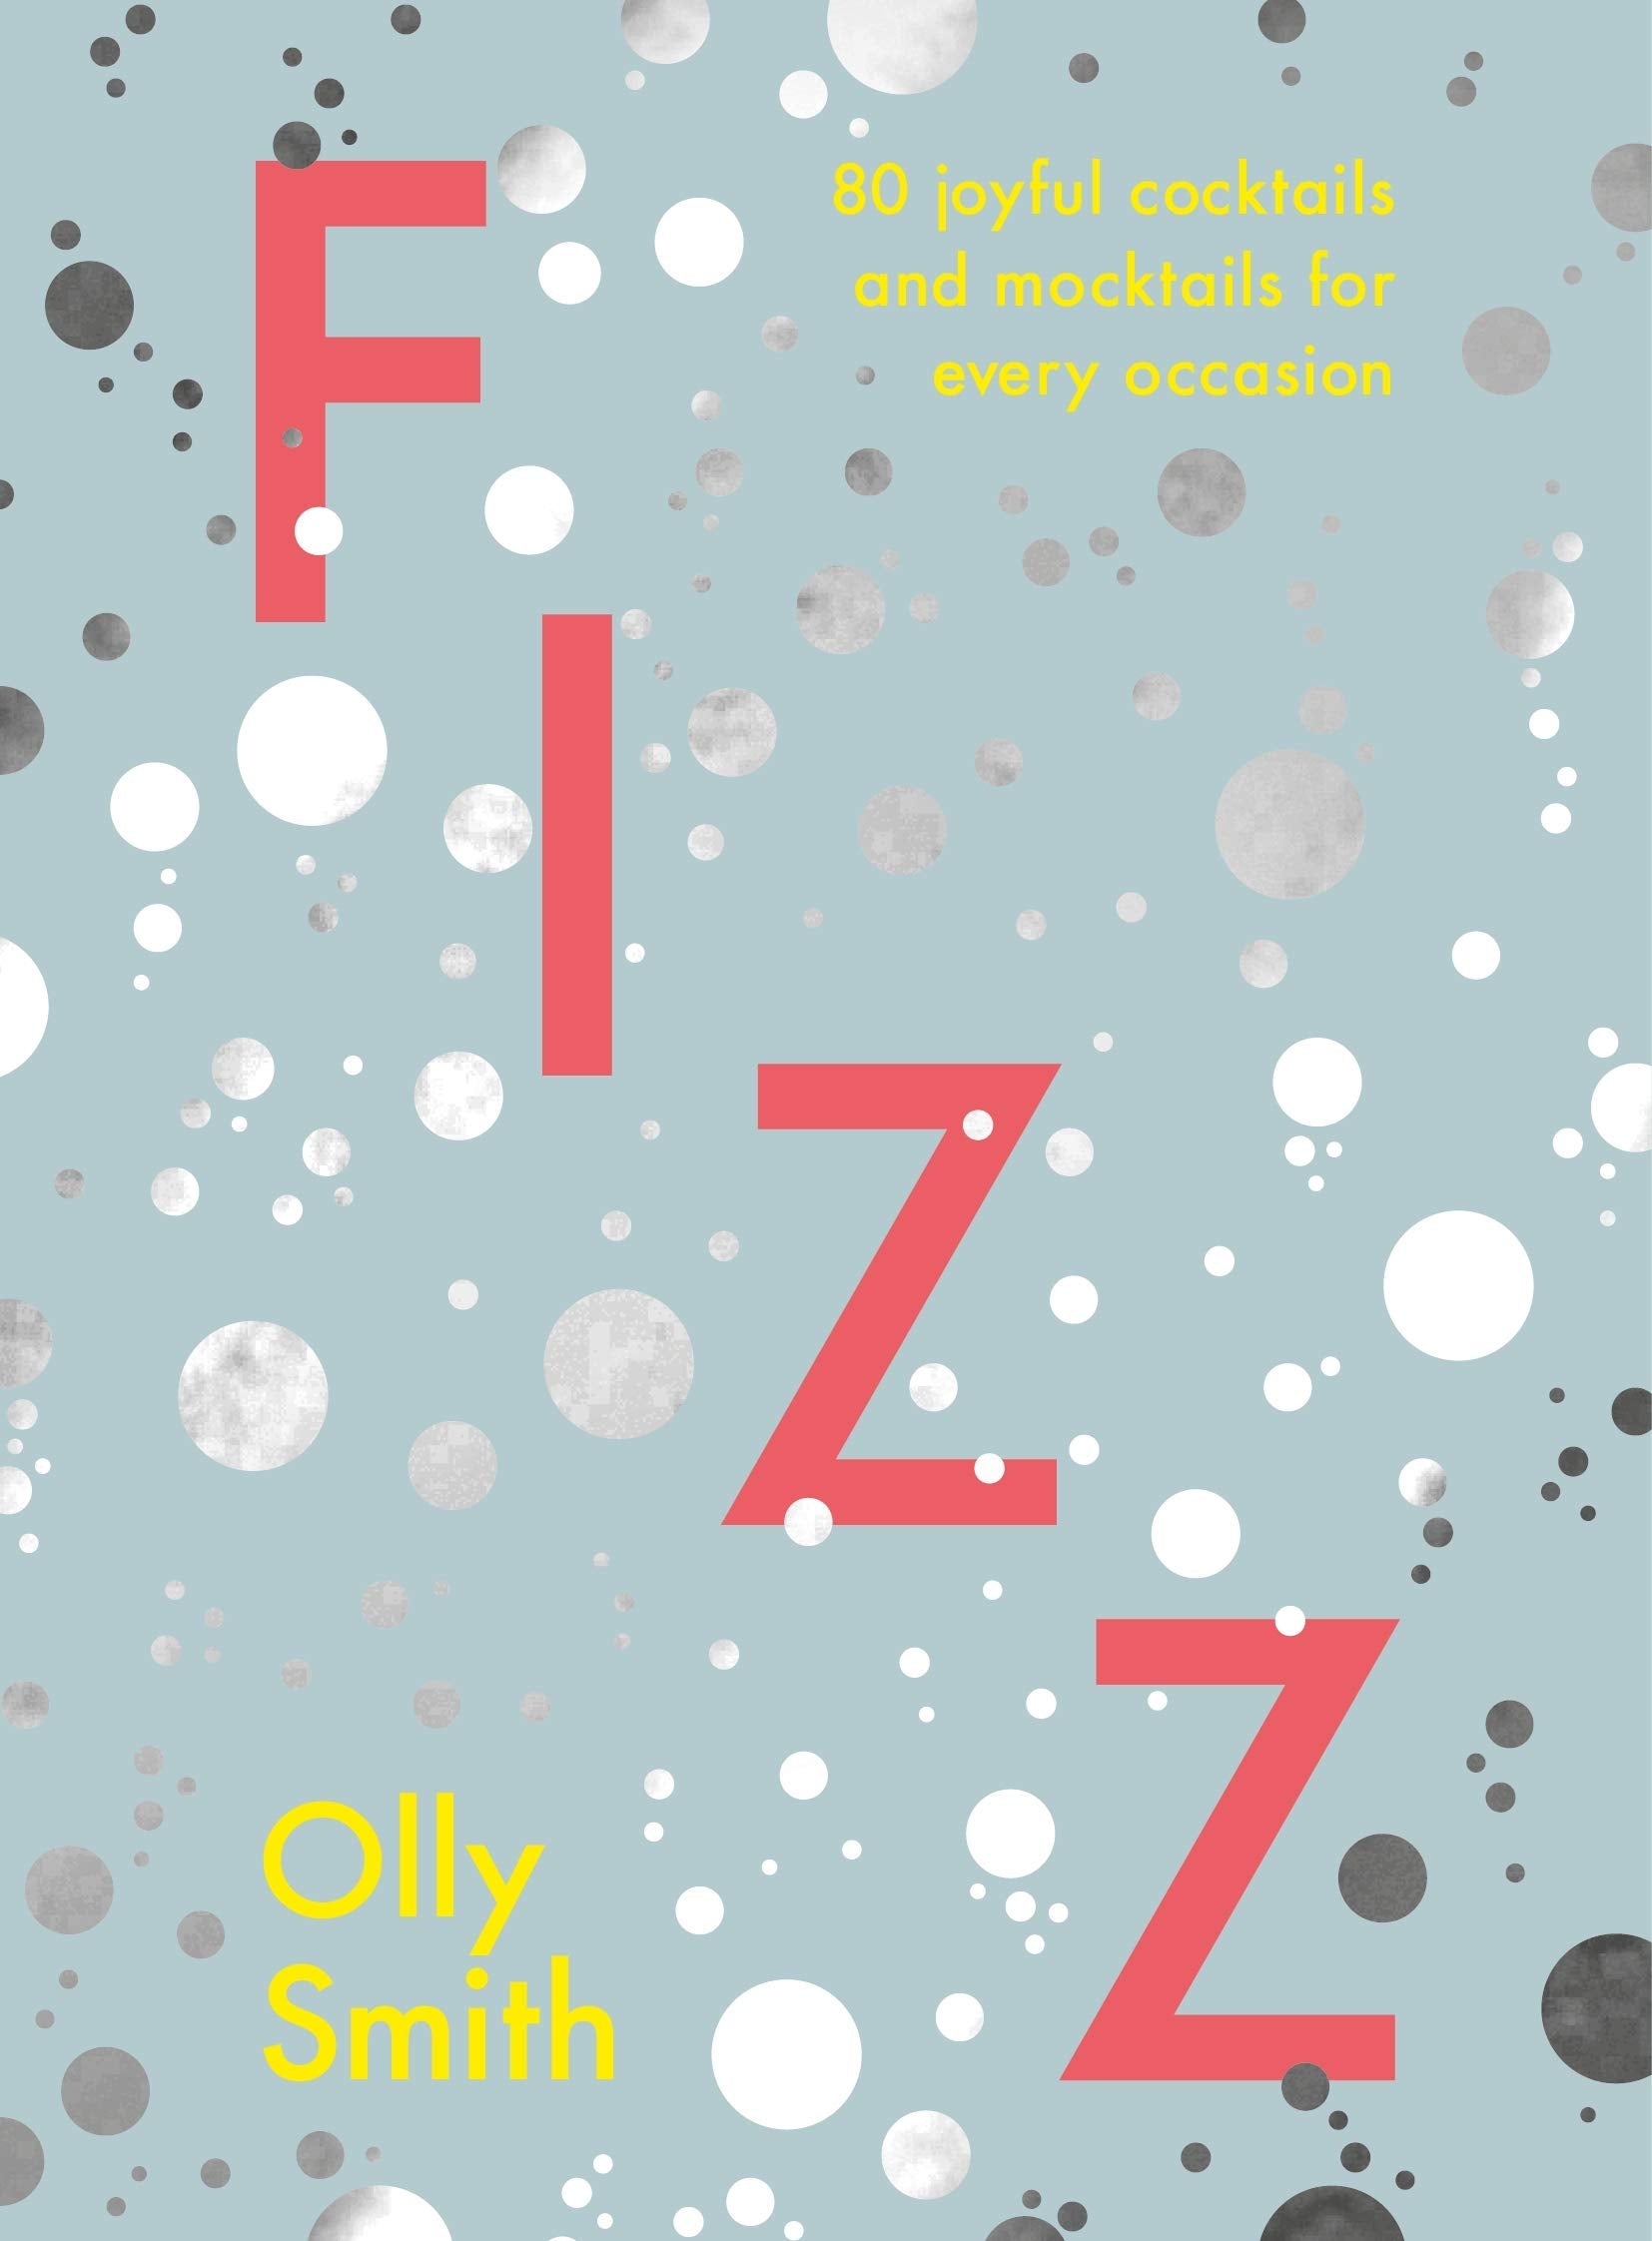 Fizz: 80 Joyful Cocktails and Mocktails For Every Occasion (Olly Smith)